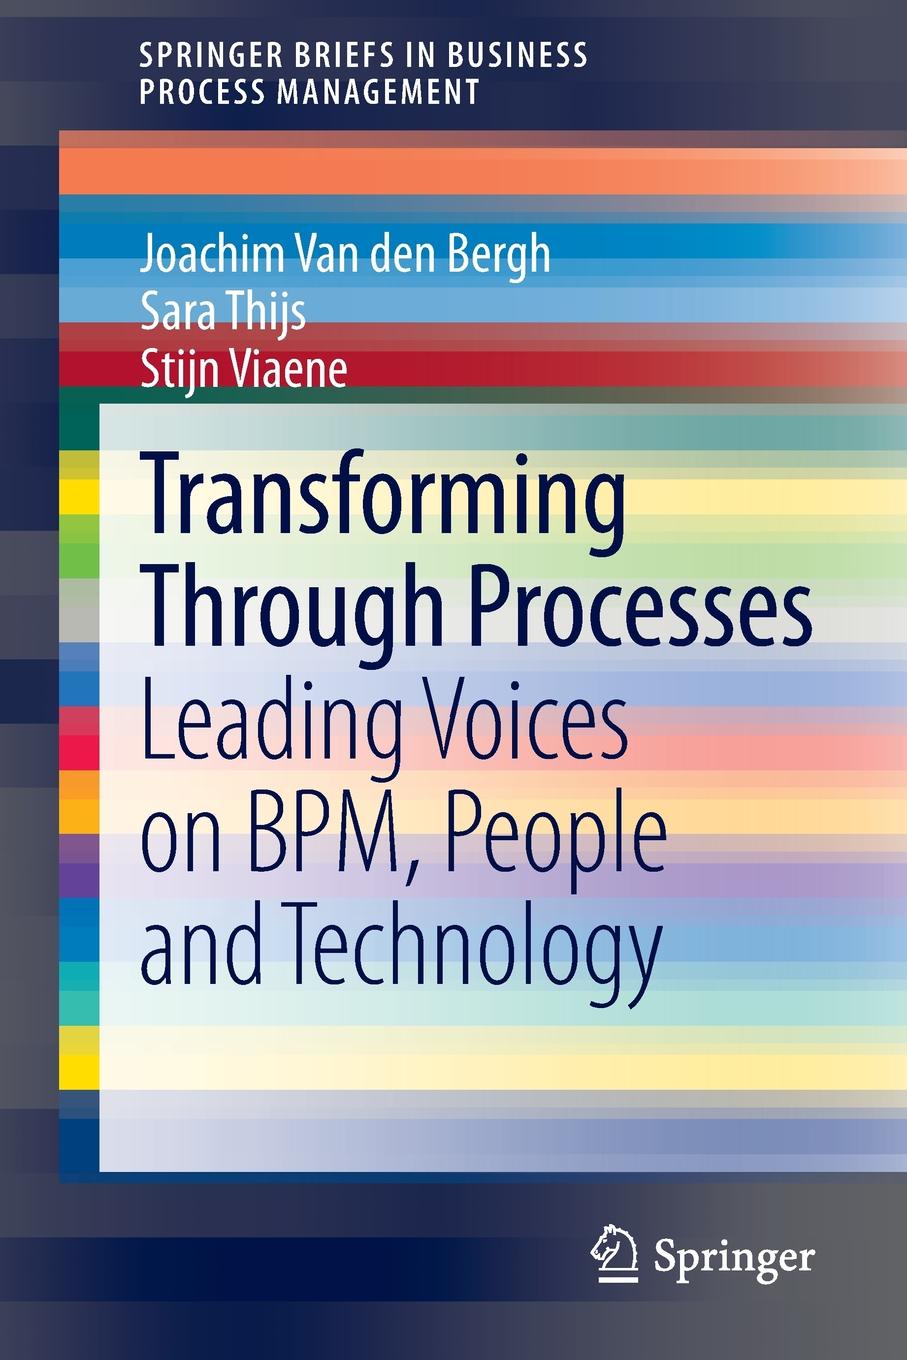 Transforming Through Processes. Leading Voices on BPM, People and Technology